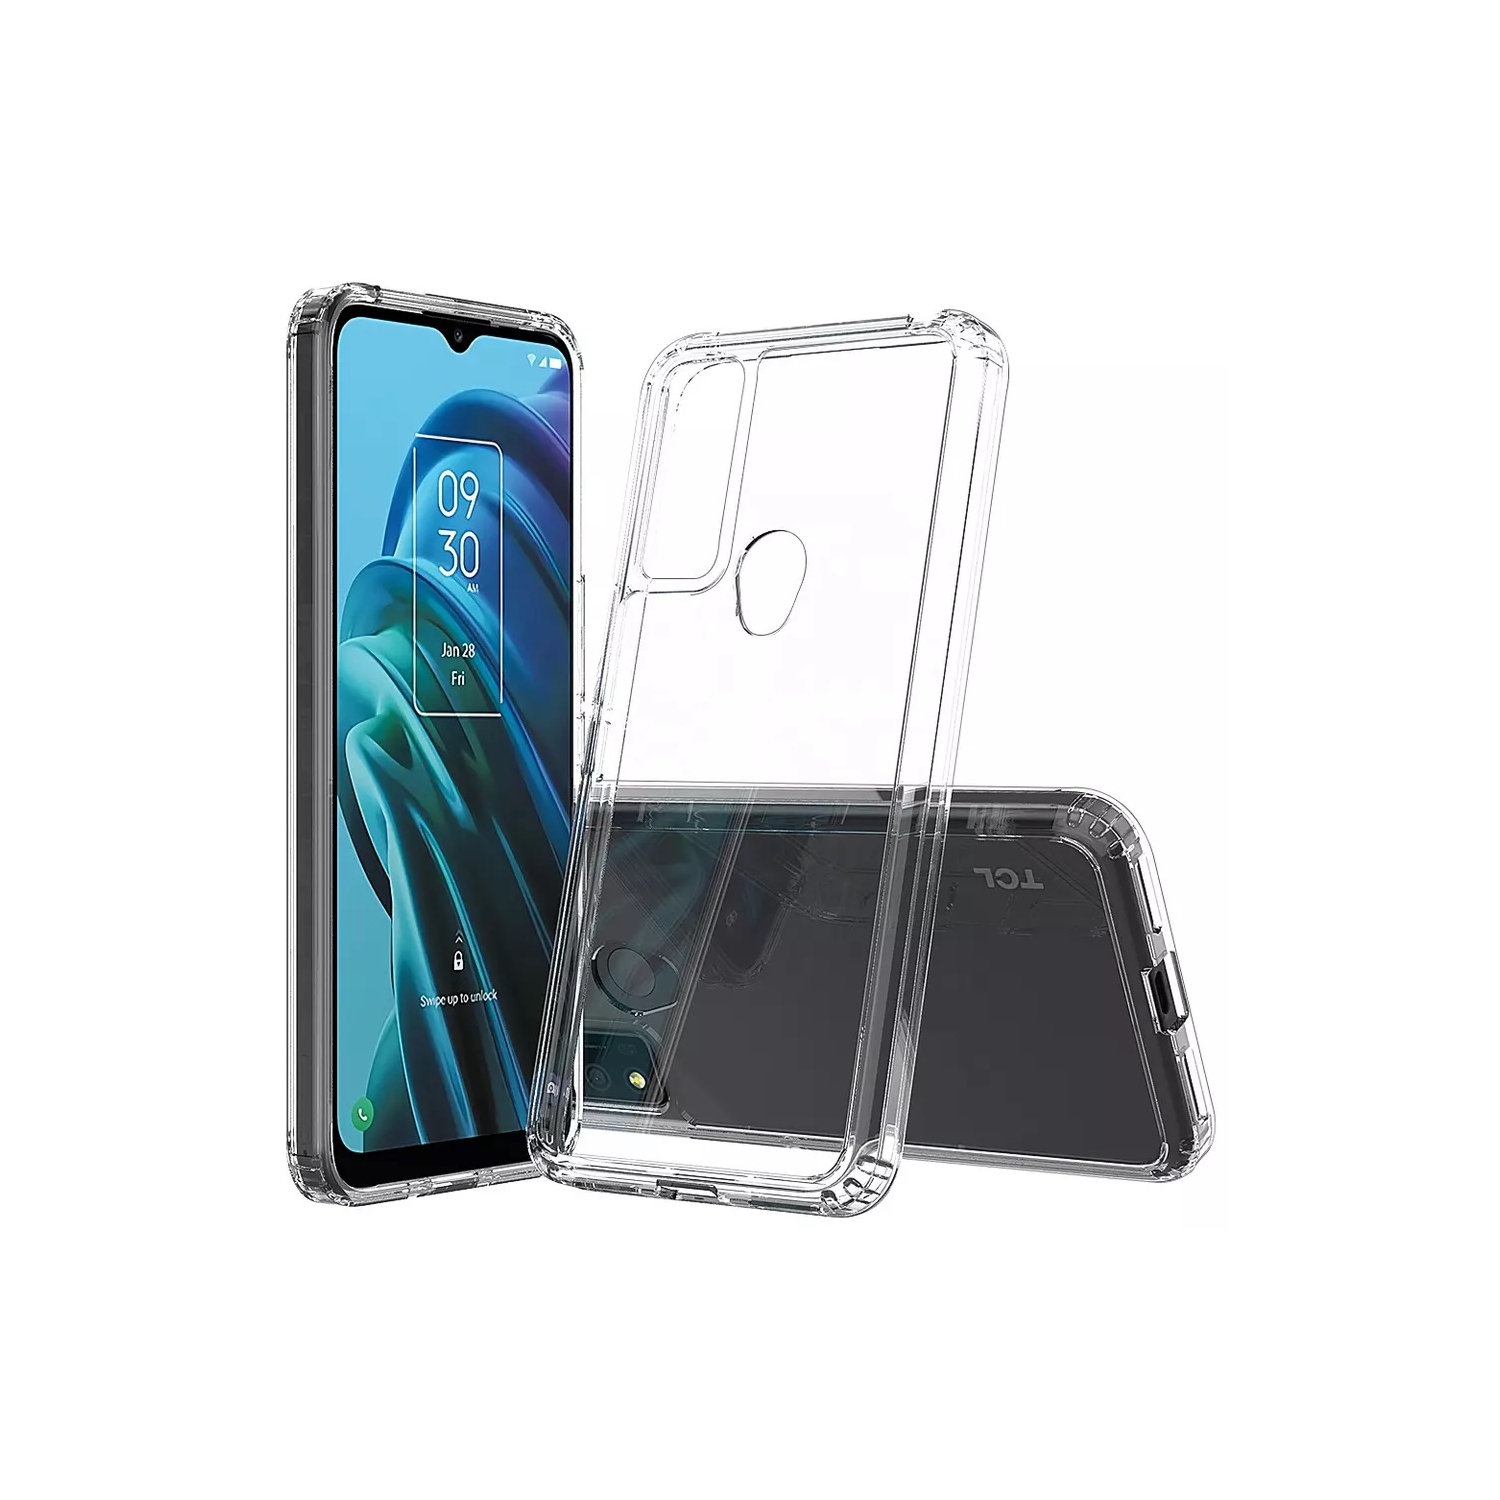 Slim Shockproof Crystal Clear Acrylic Cover with Complete overall Protection, bumper, and reinforced edges hard-shell case for TCL 30 XE 5G 6.5 inch 2022 Phone